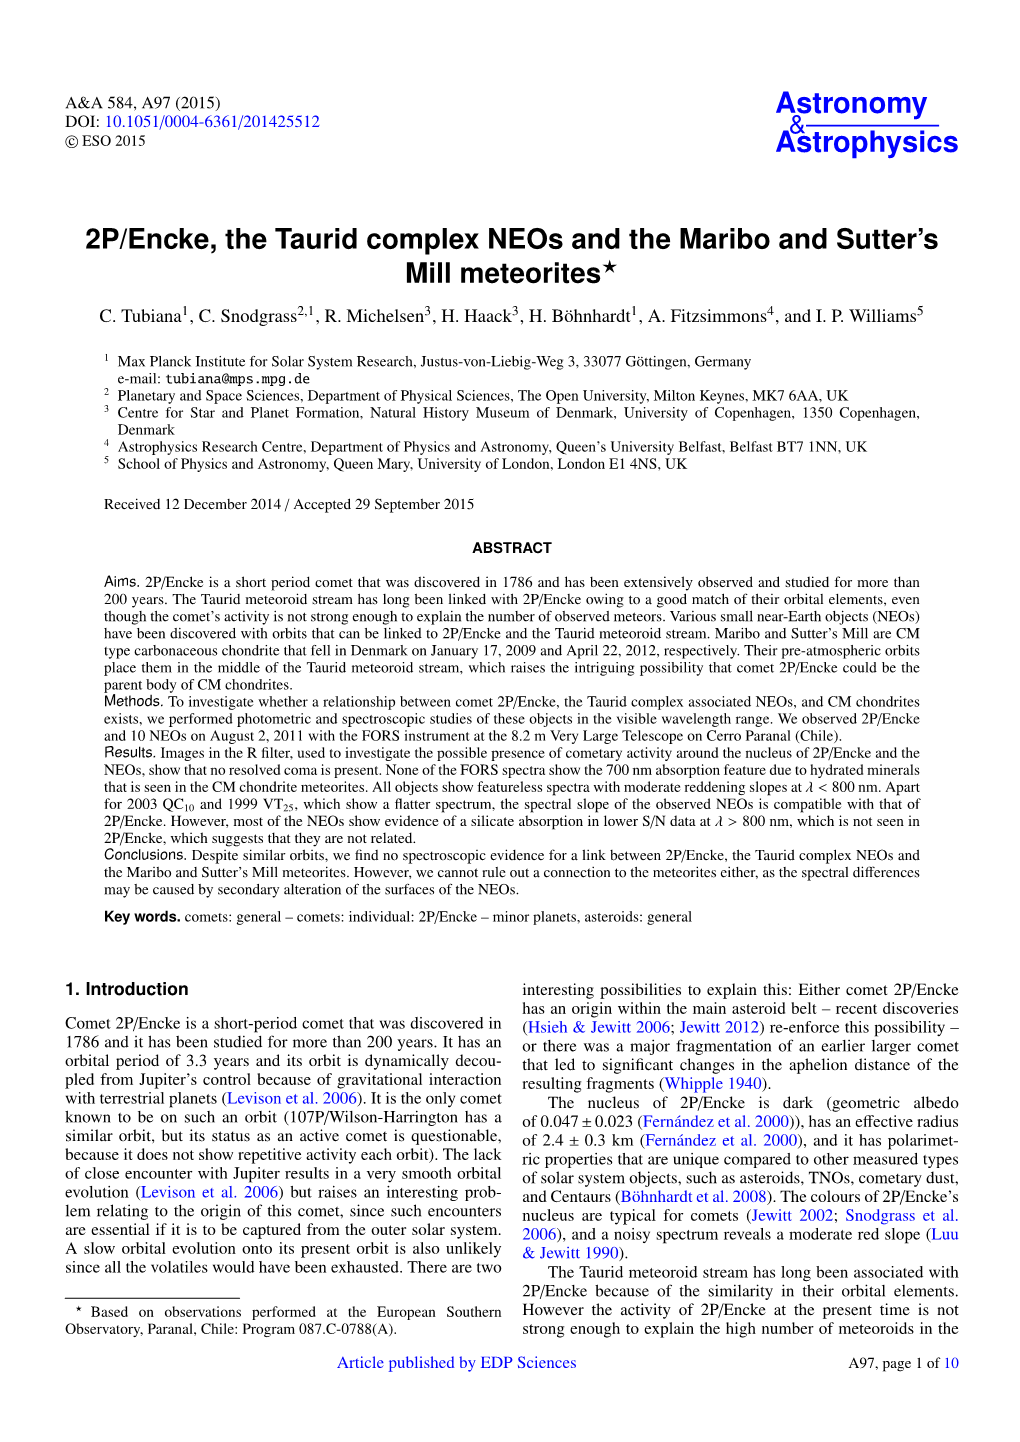 2P/Encke, the Taurid Complex Neos and the Maribo and Sutter's Mill Meteorites